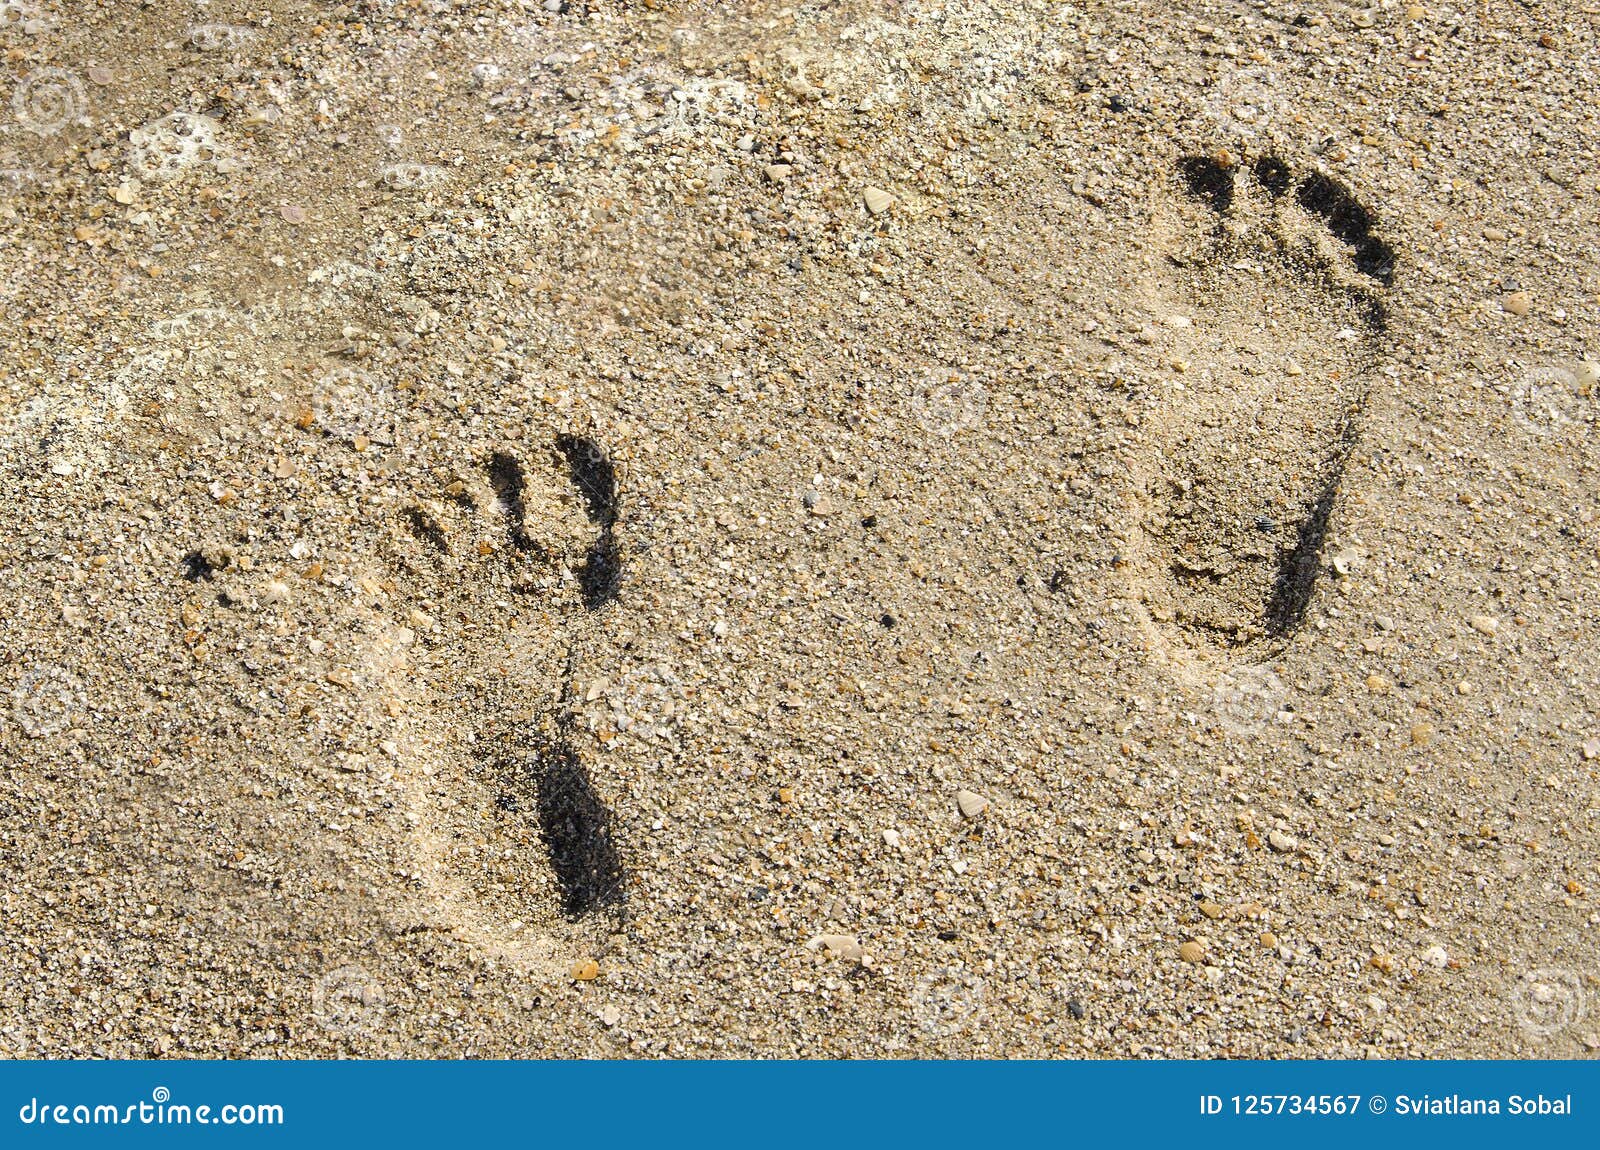 Children Footprints In The Sand. Human Footprints Leading Away From The ...